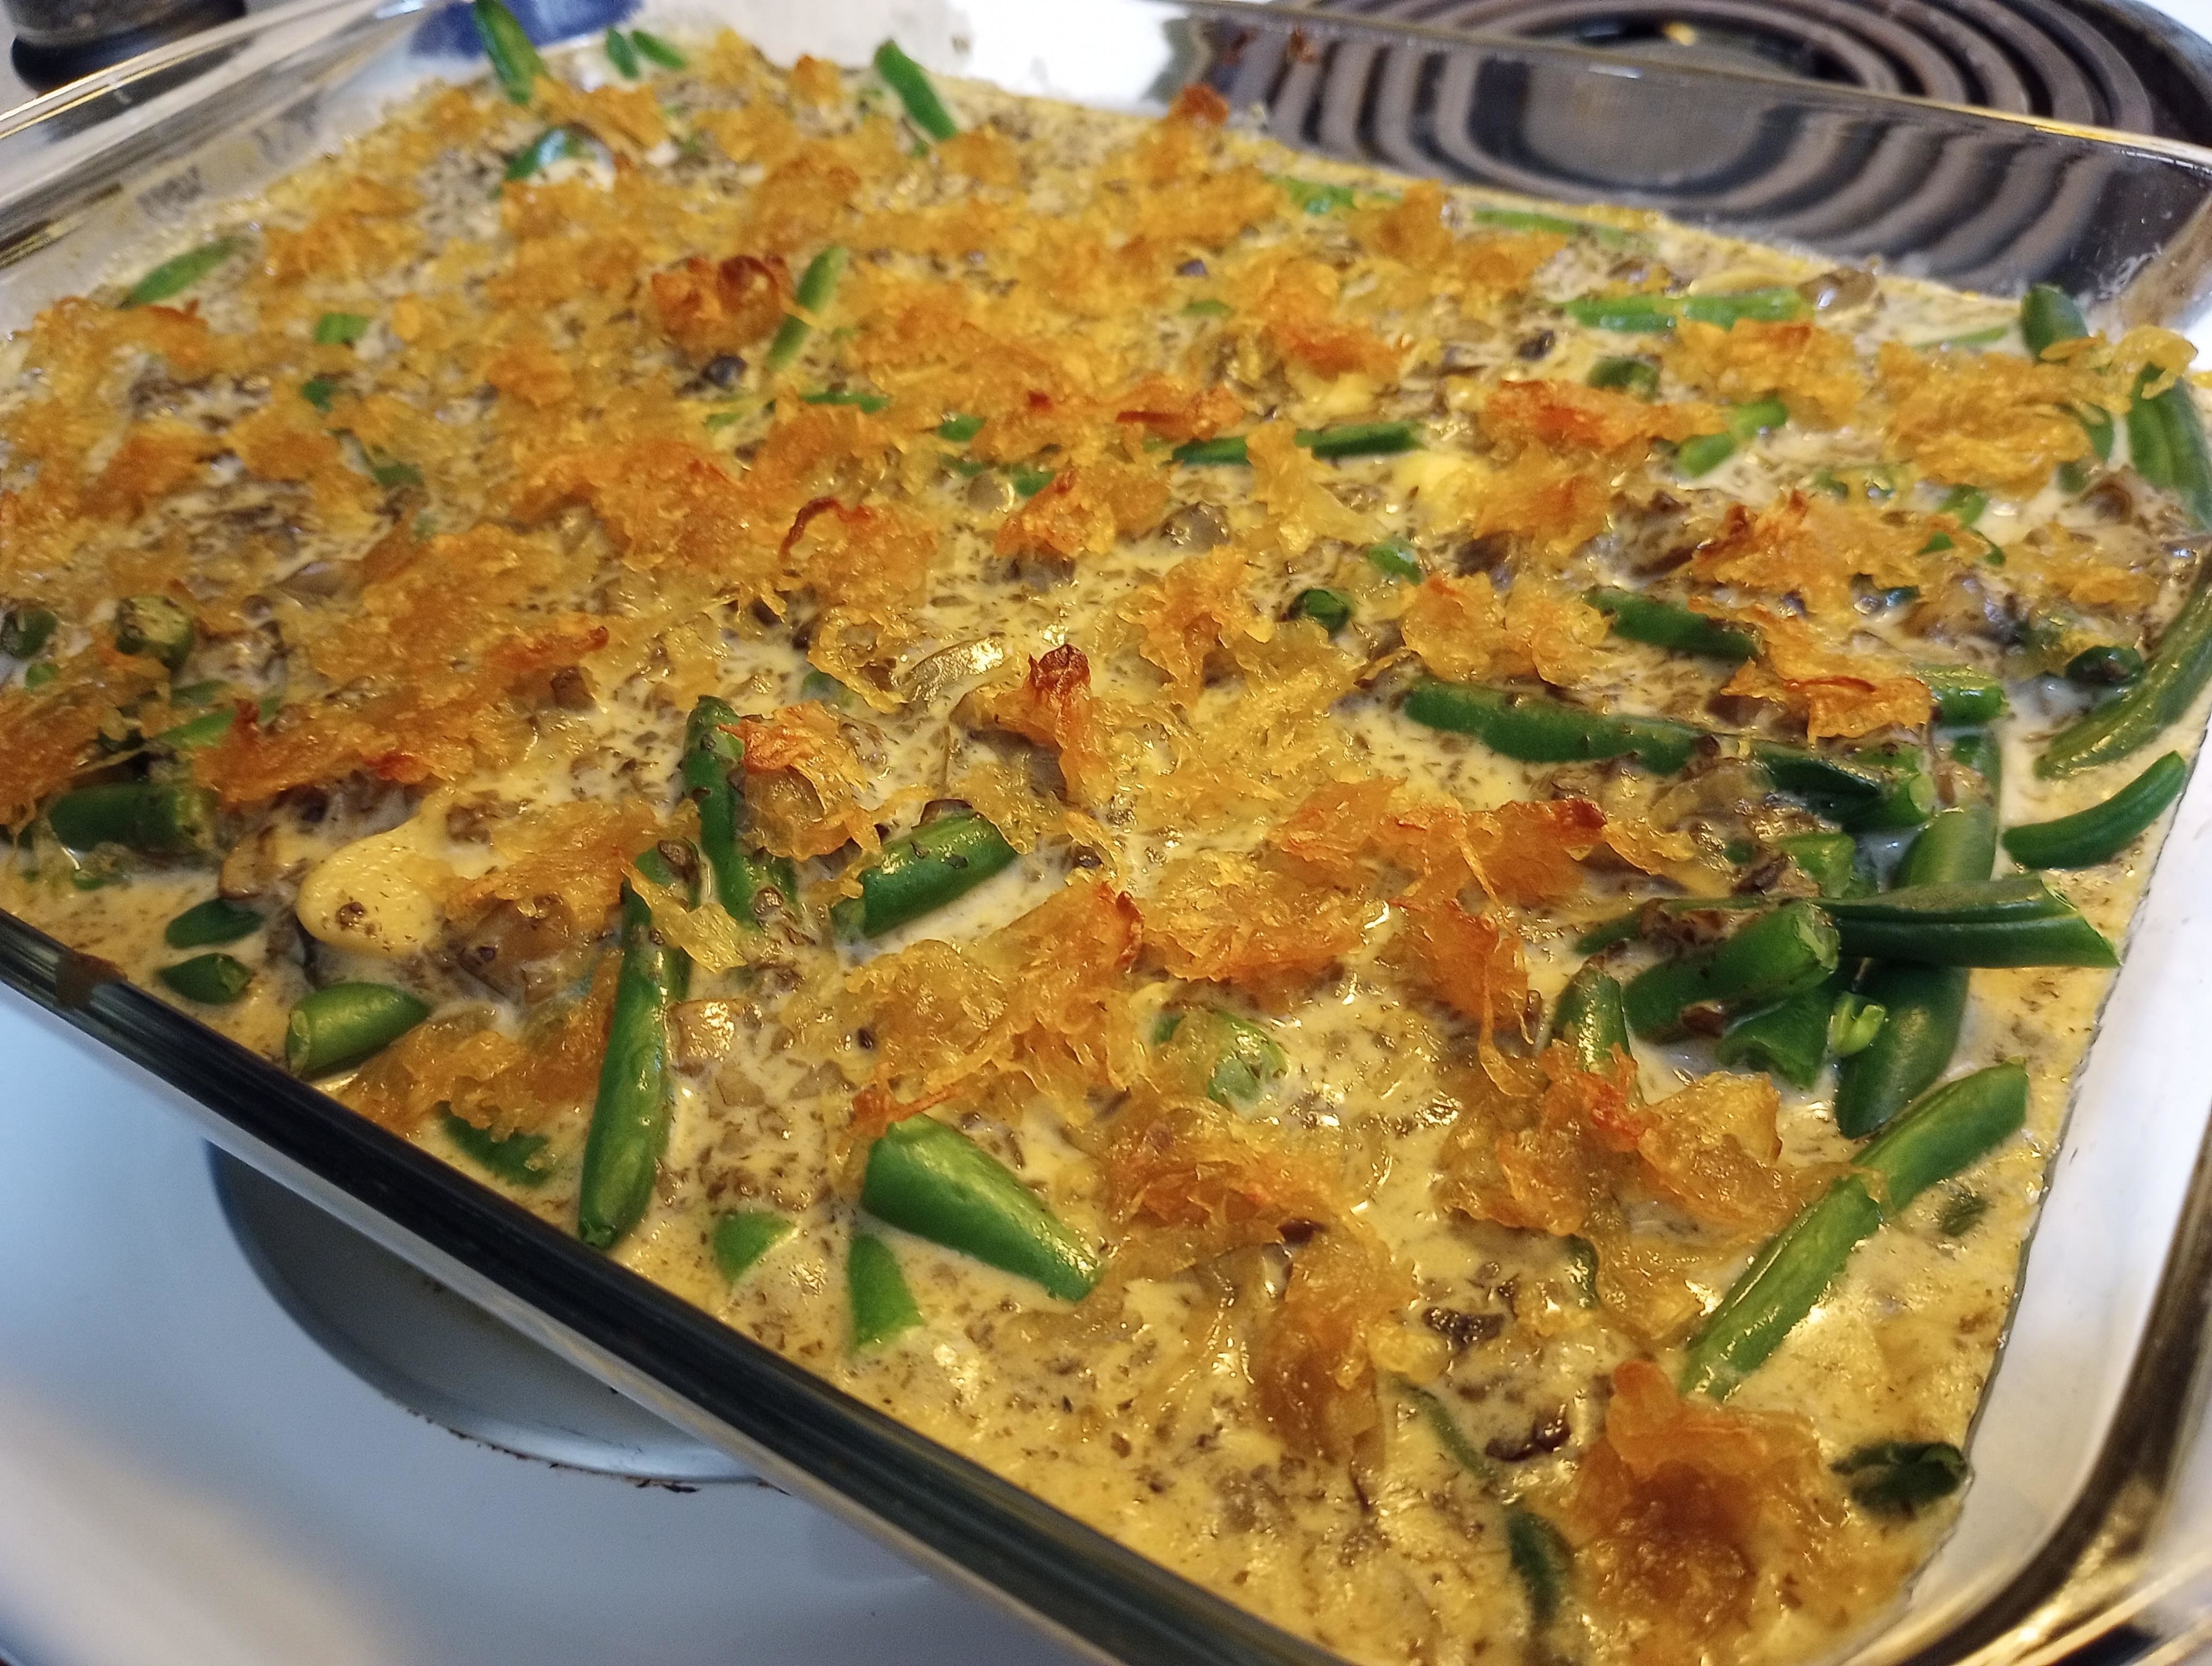 A casserole dish with green beans and crispy onions in a creamy sauce